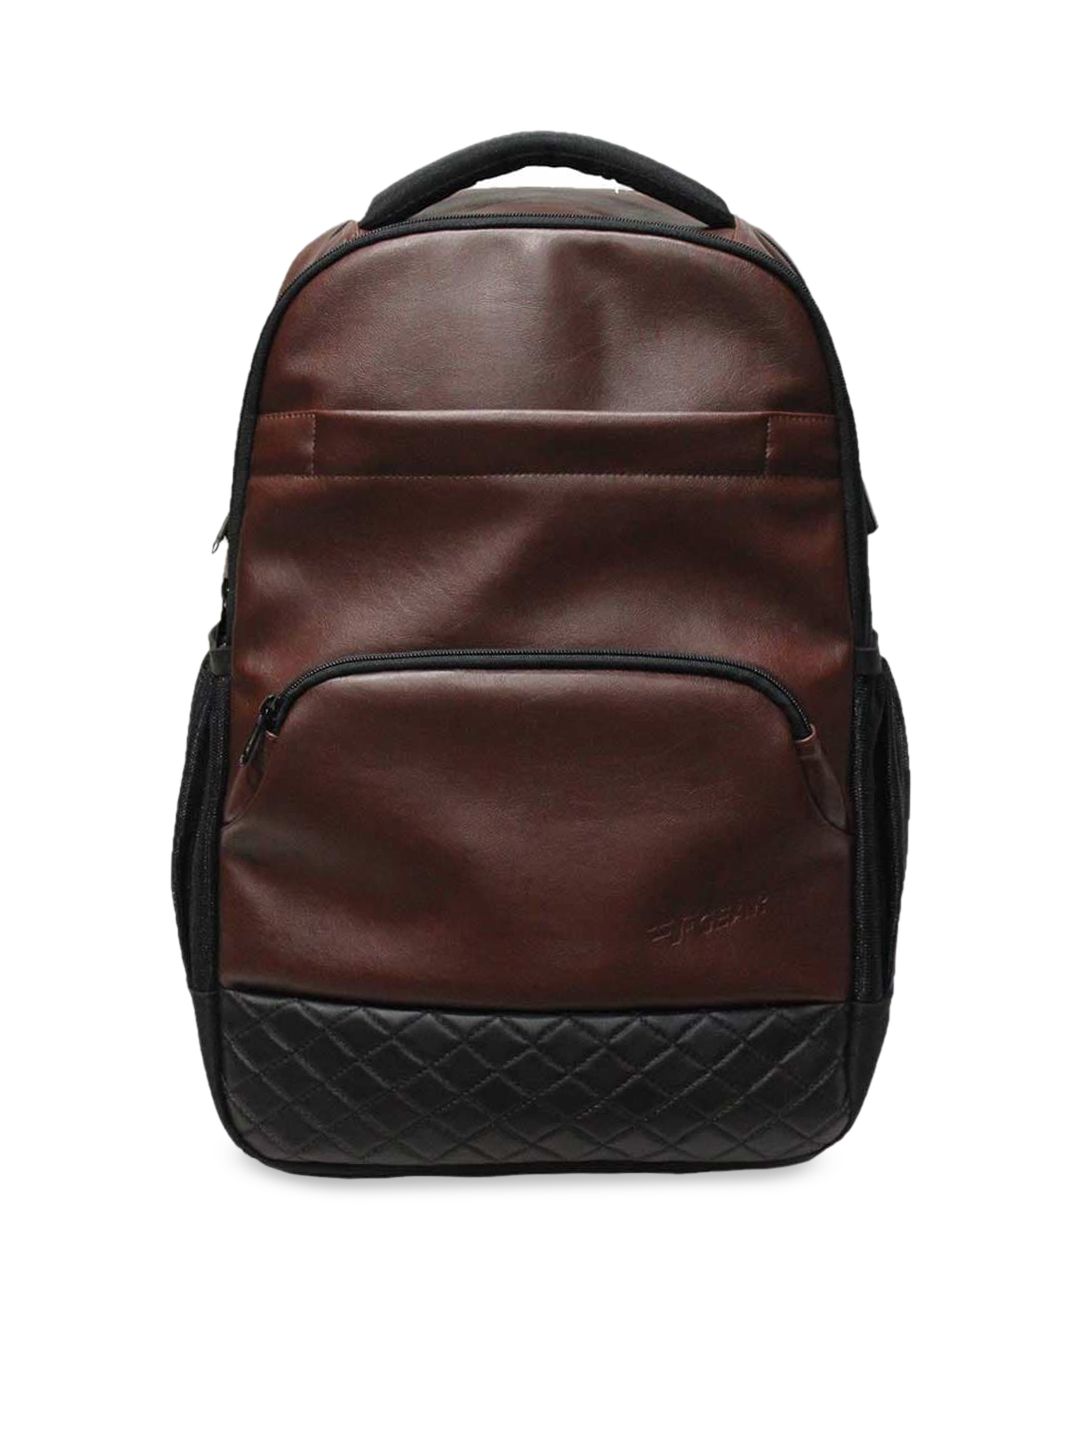 F Gear Unisex Brown Backpacks with USB Charging Port Price in India